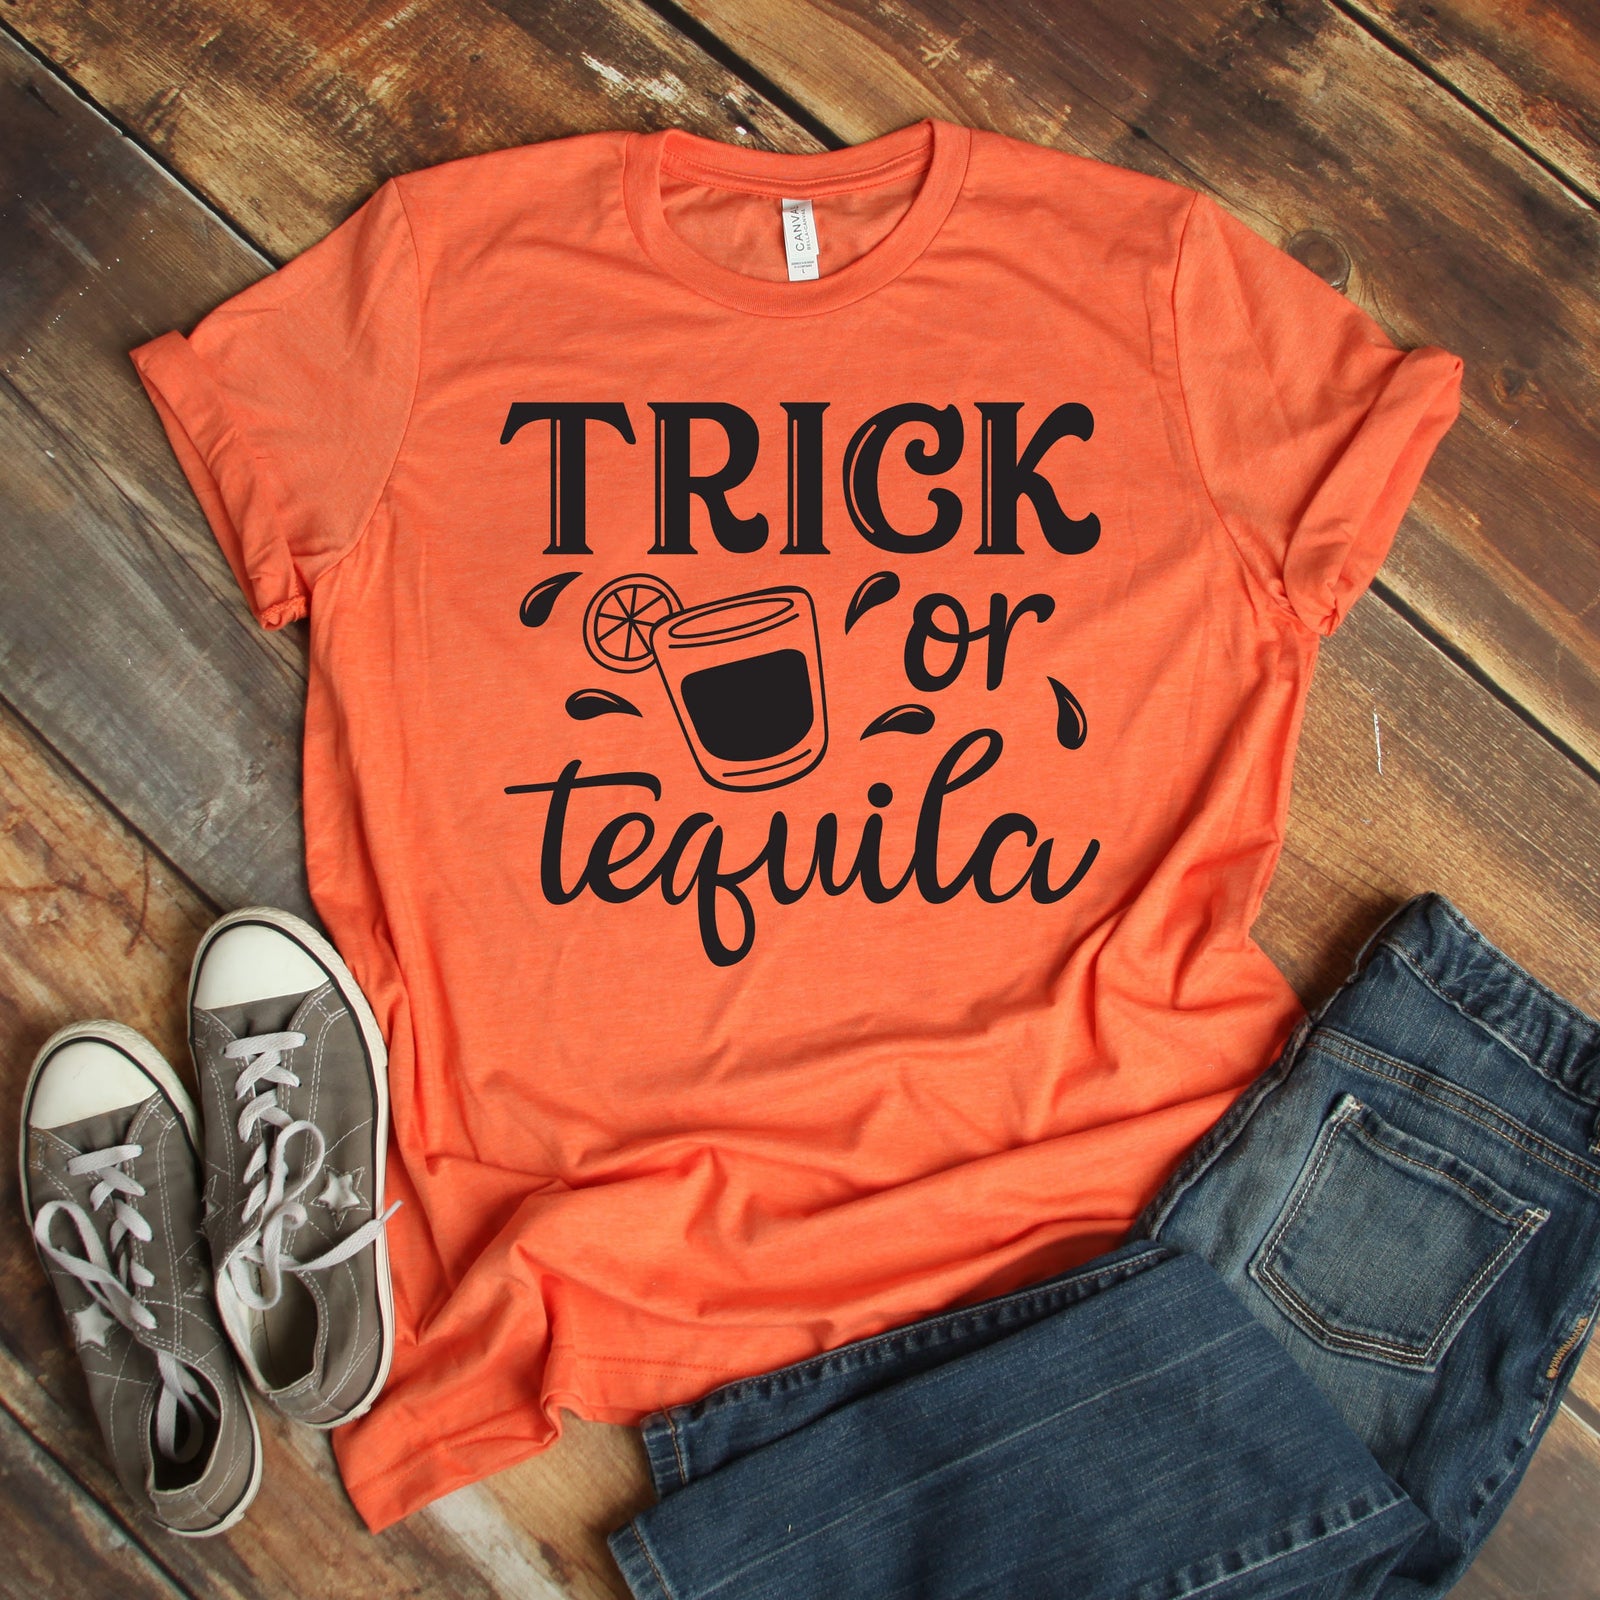 Trick or Tequila - Happy Halloween Adult T Shirt -Drinking Shirt - Funny Halloween Shirt